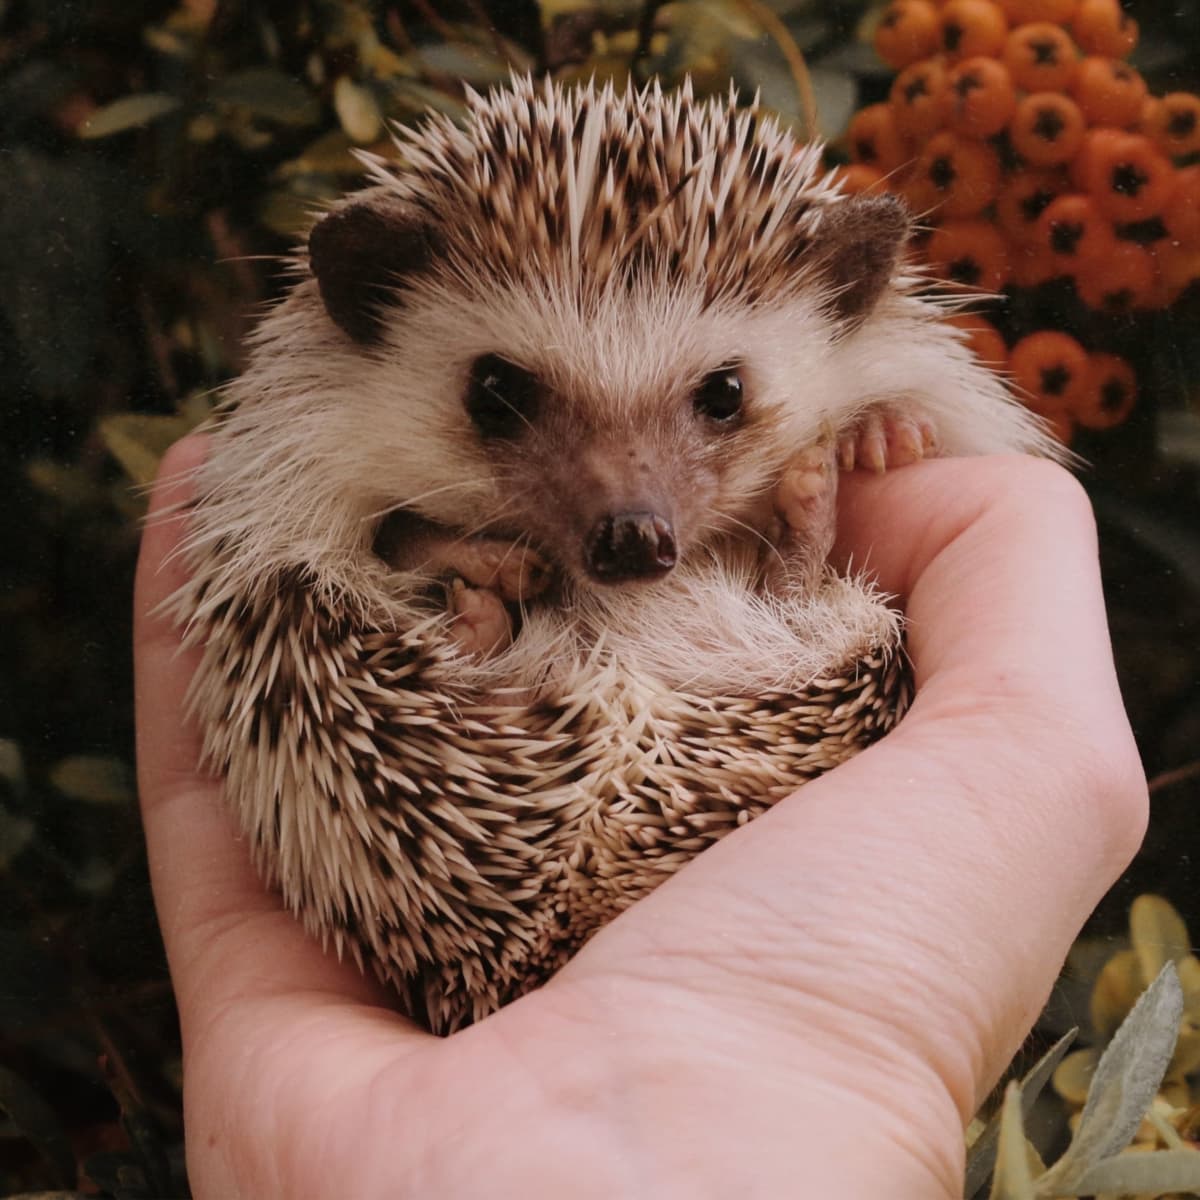 7 Fun Facts About Pet Hedgehogs - Pethelpful